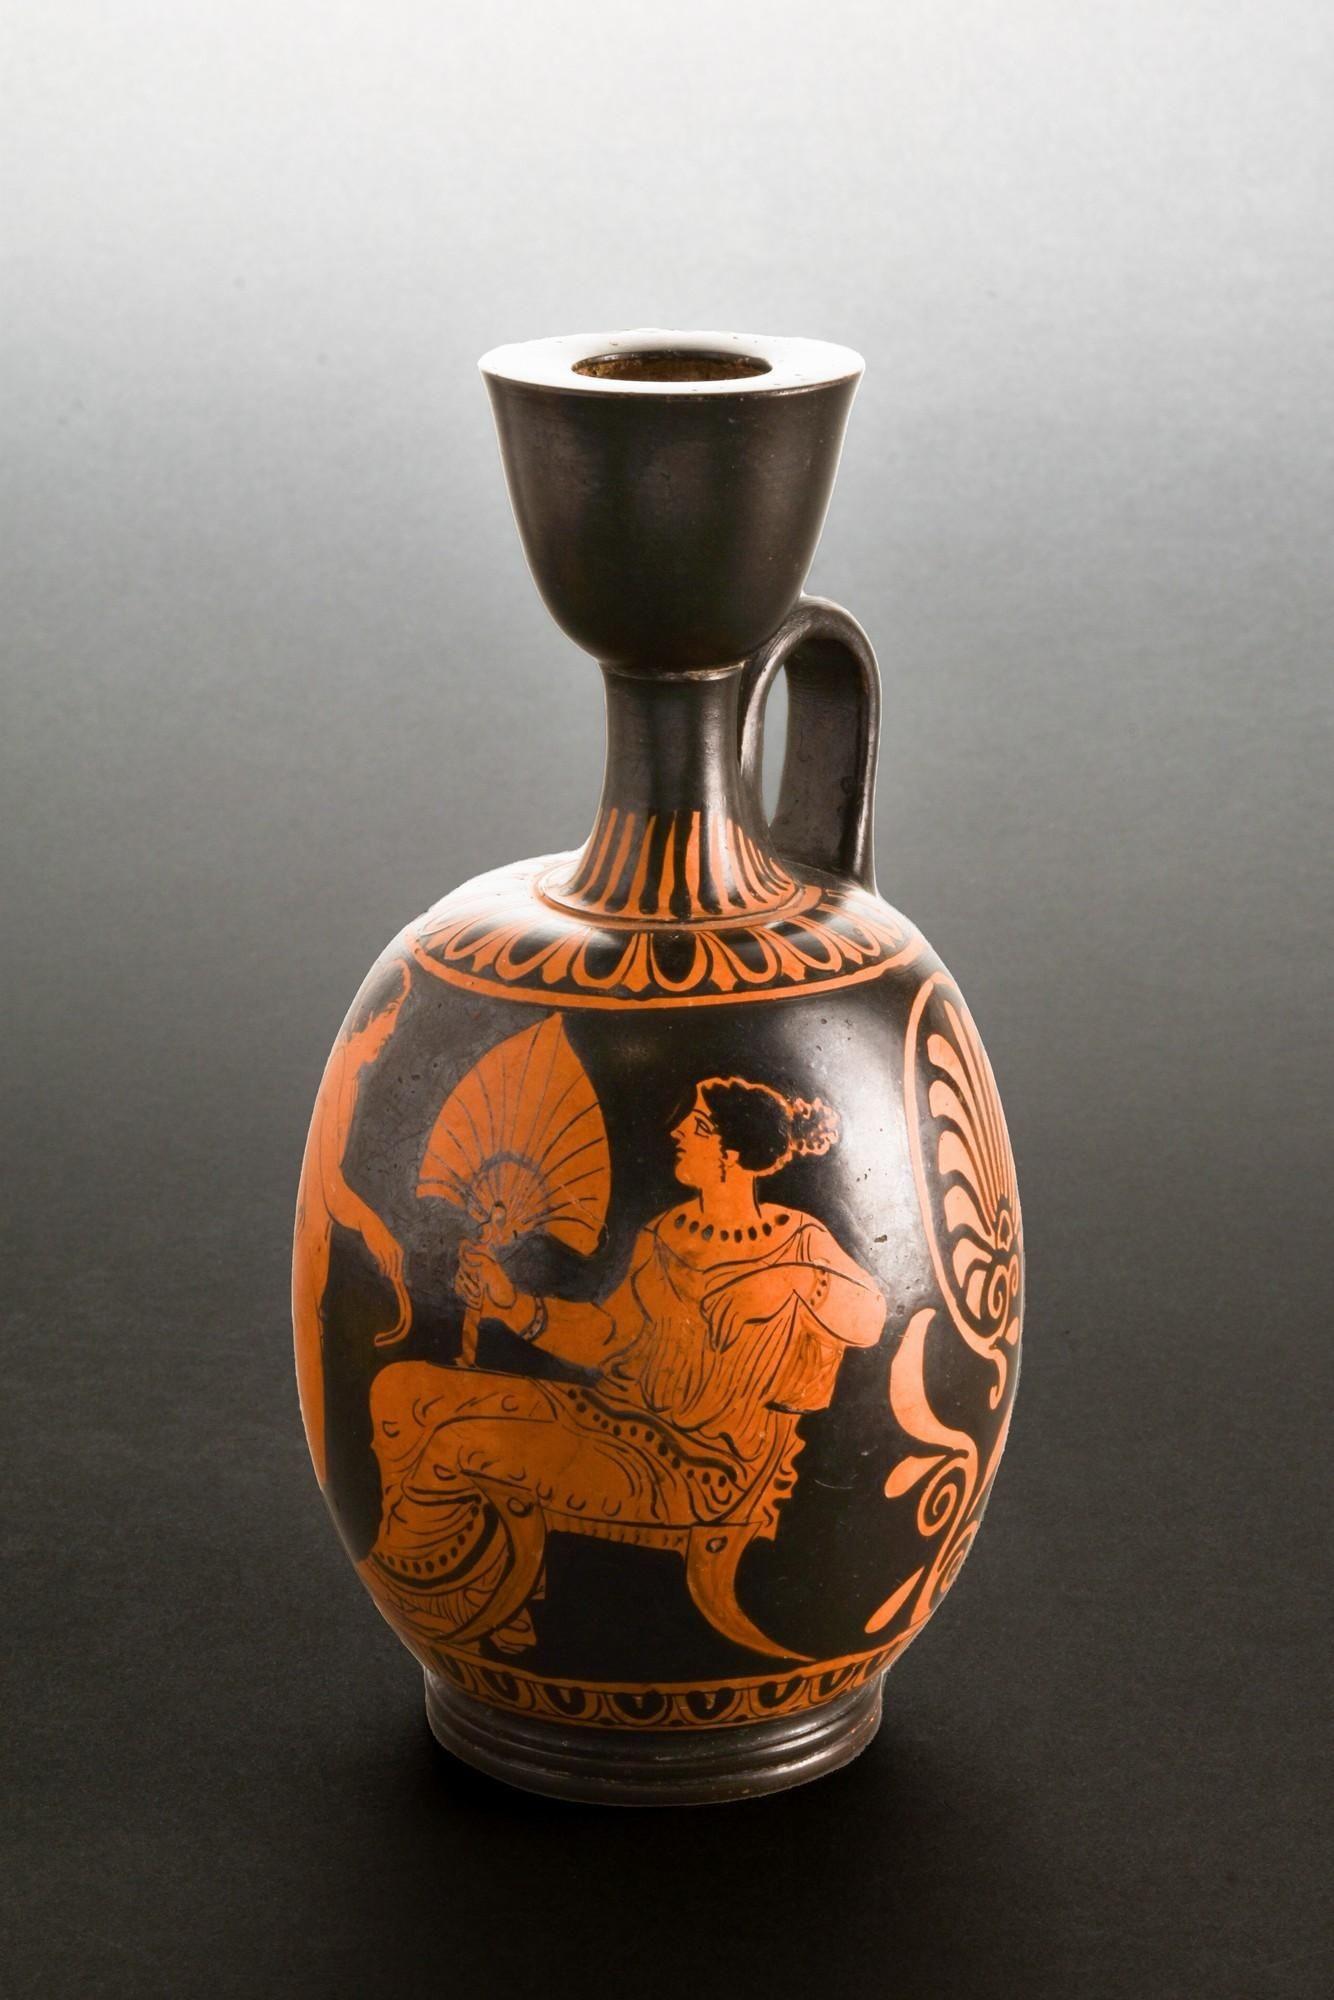 This rare ancient Apulian Iliupersis pottery vase unveils a traditional scene; a young woman seated, dressed with a delicately draped garment, gracefully holding a fan. In front of her stands a caped man holding a strigil. The piece is accompanied